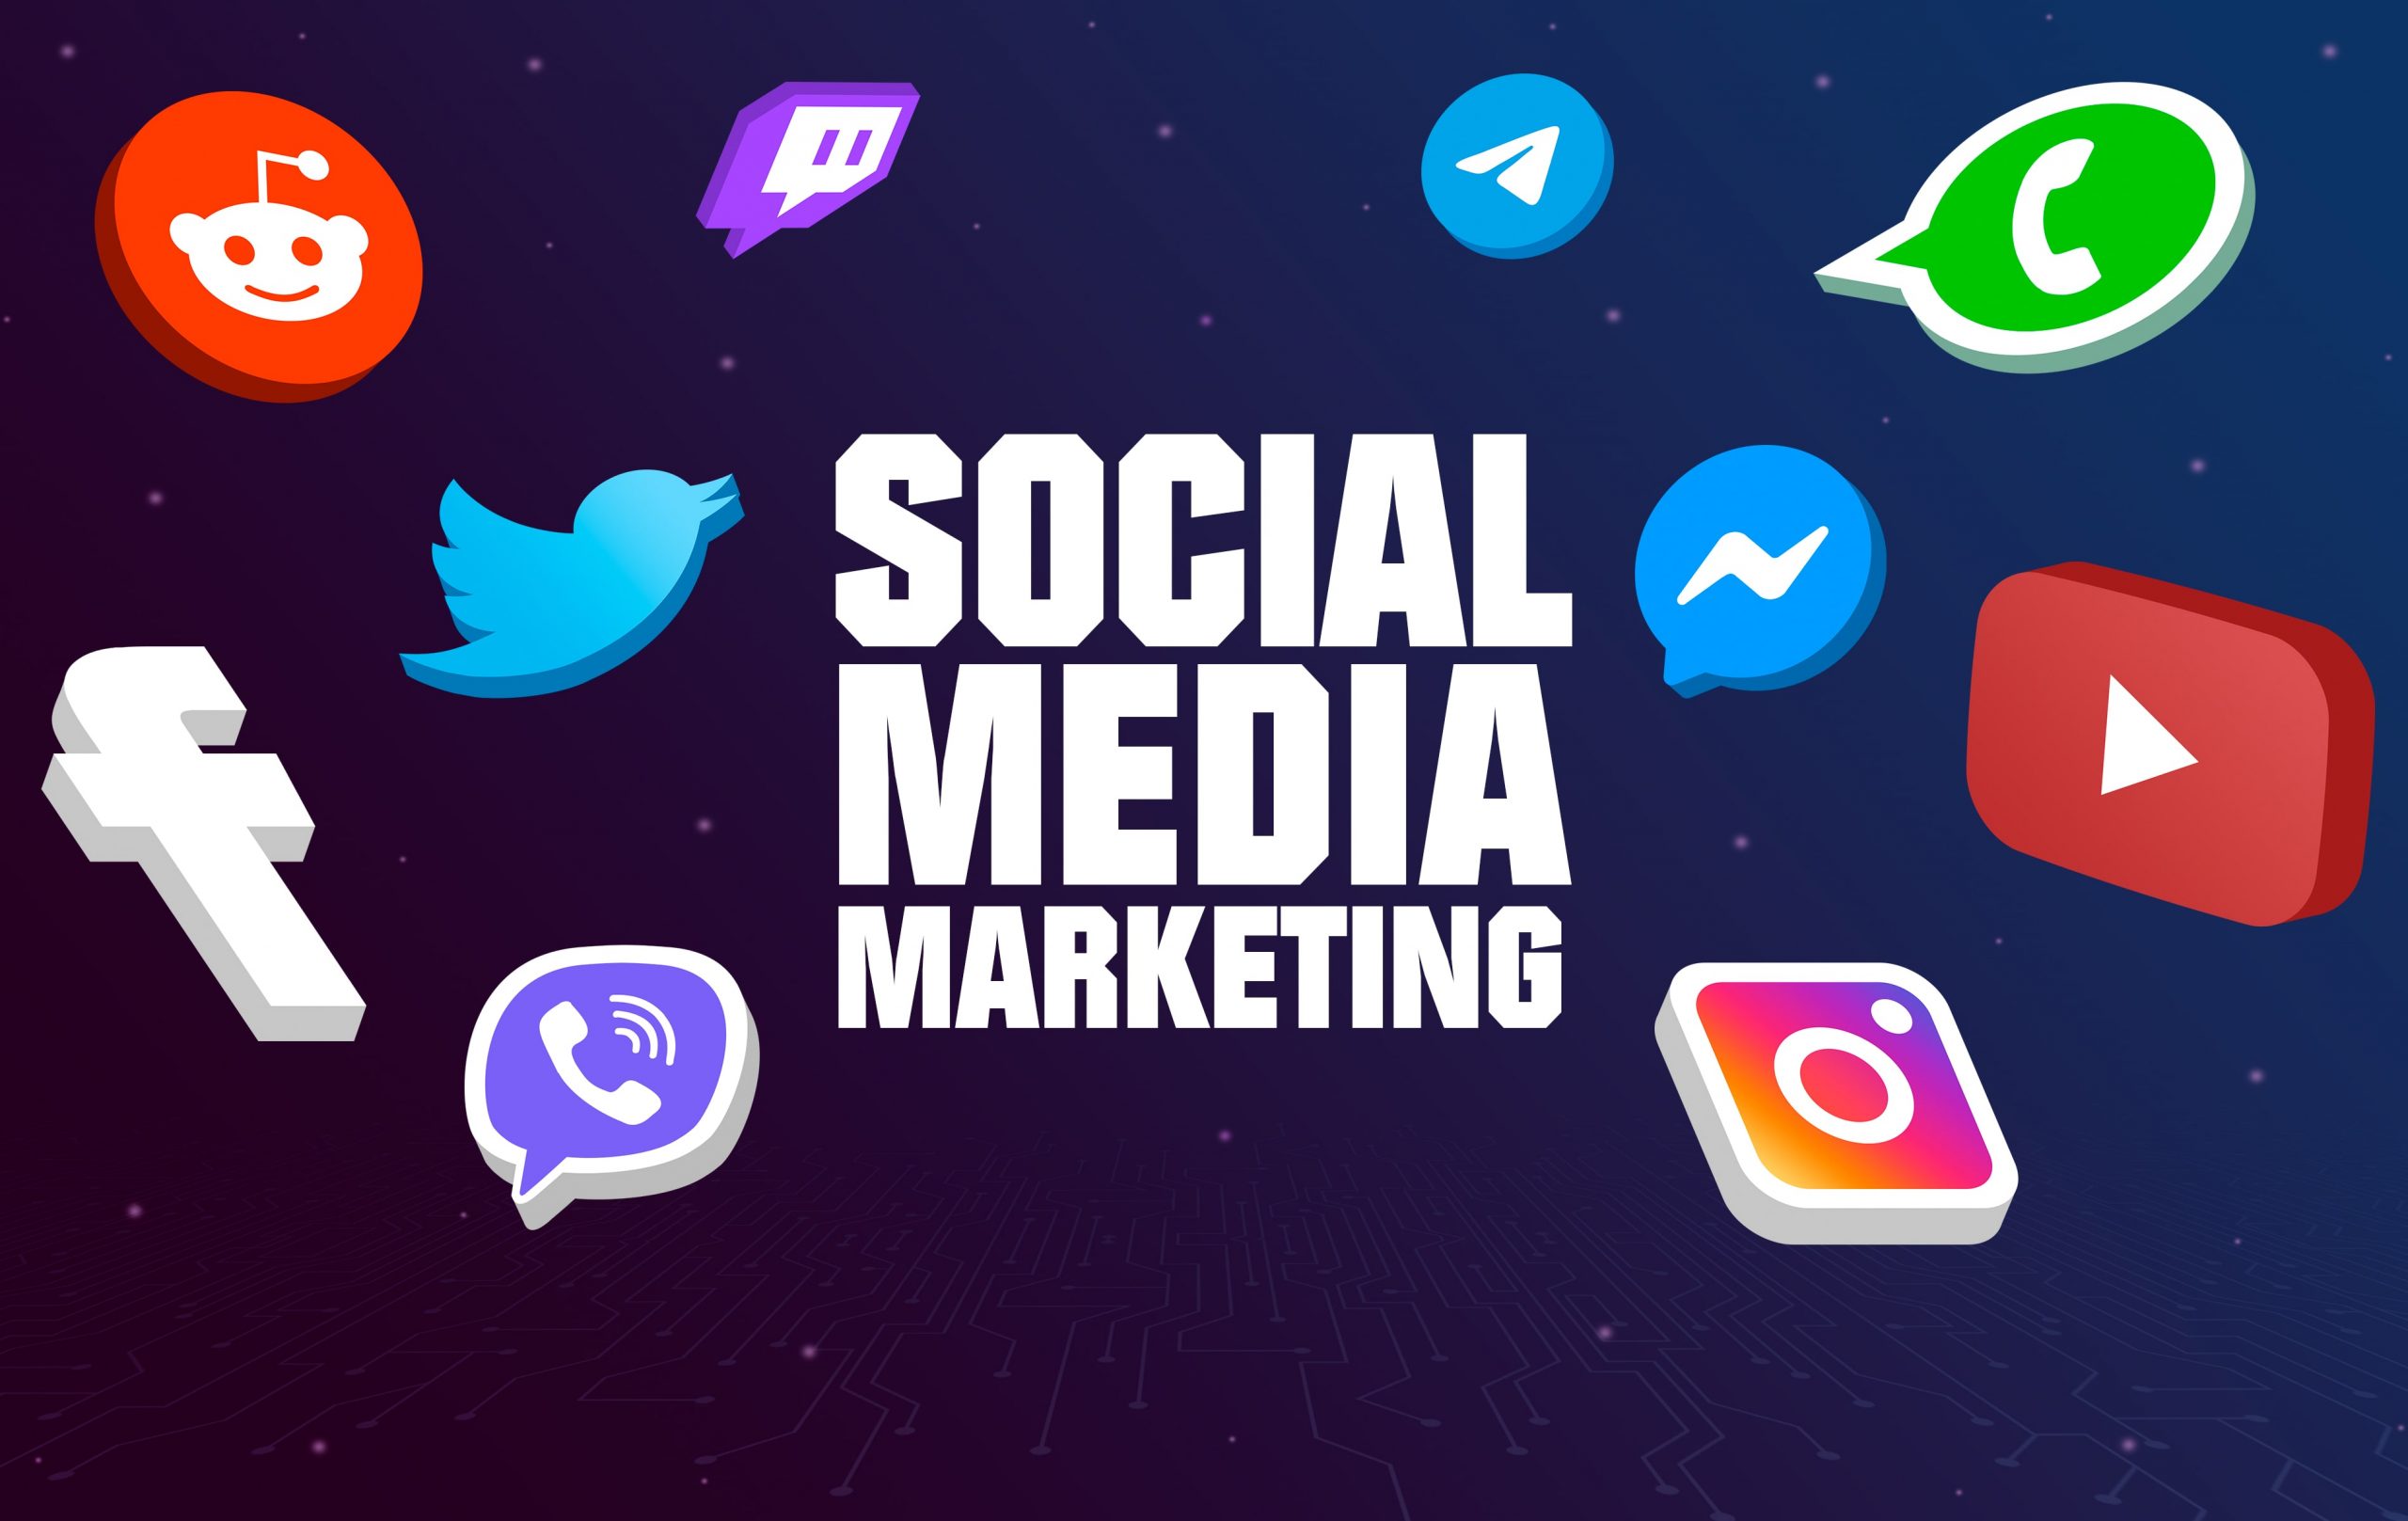 Tips for social media marketing every business should follow